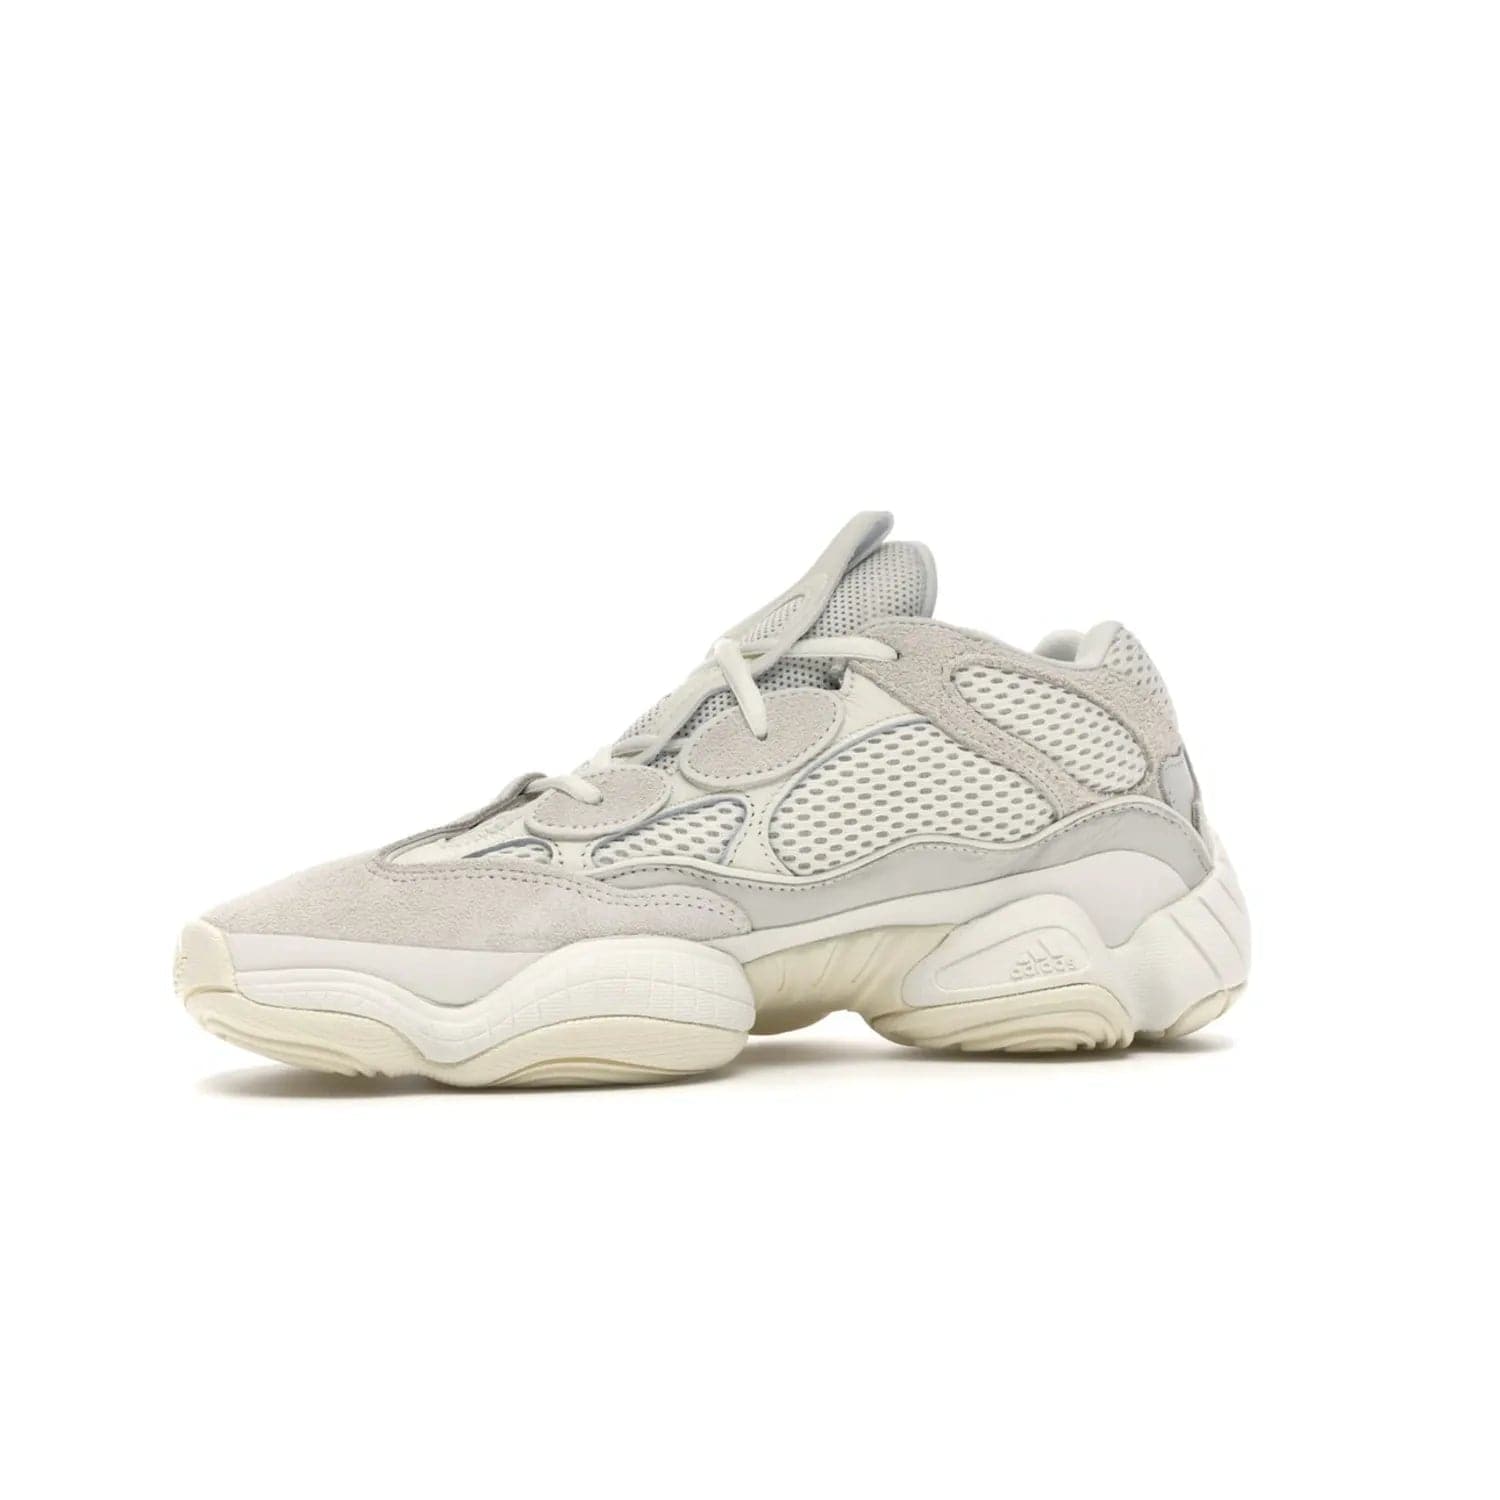 adidas Yeezy 500 Bone White - Image 17 - Only at www.BallersClubKickz.com - Classic look perfect for any sneaker collection. The adidas Yeezy 500 "Bone White" blends a white mesh upper with suede overlays & a chunky midsole inspired by the Adidas KB3. Complimented by a tonal-cream outsole, this timeless style is a must-have.